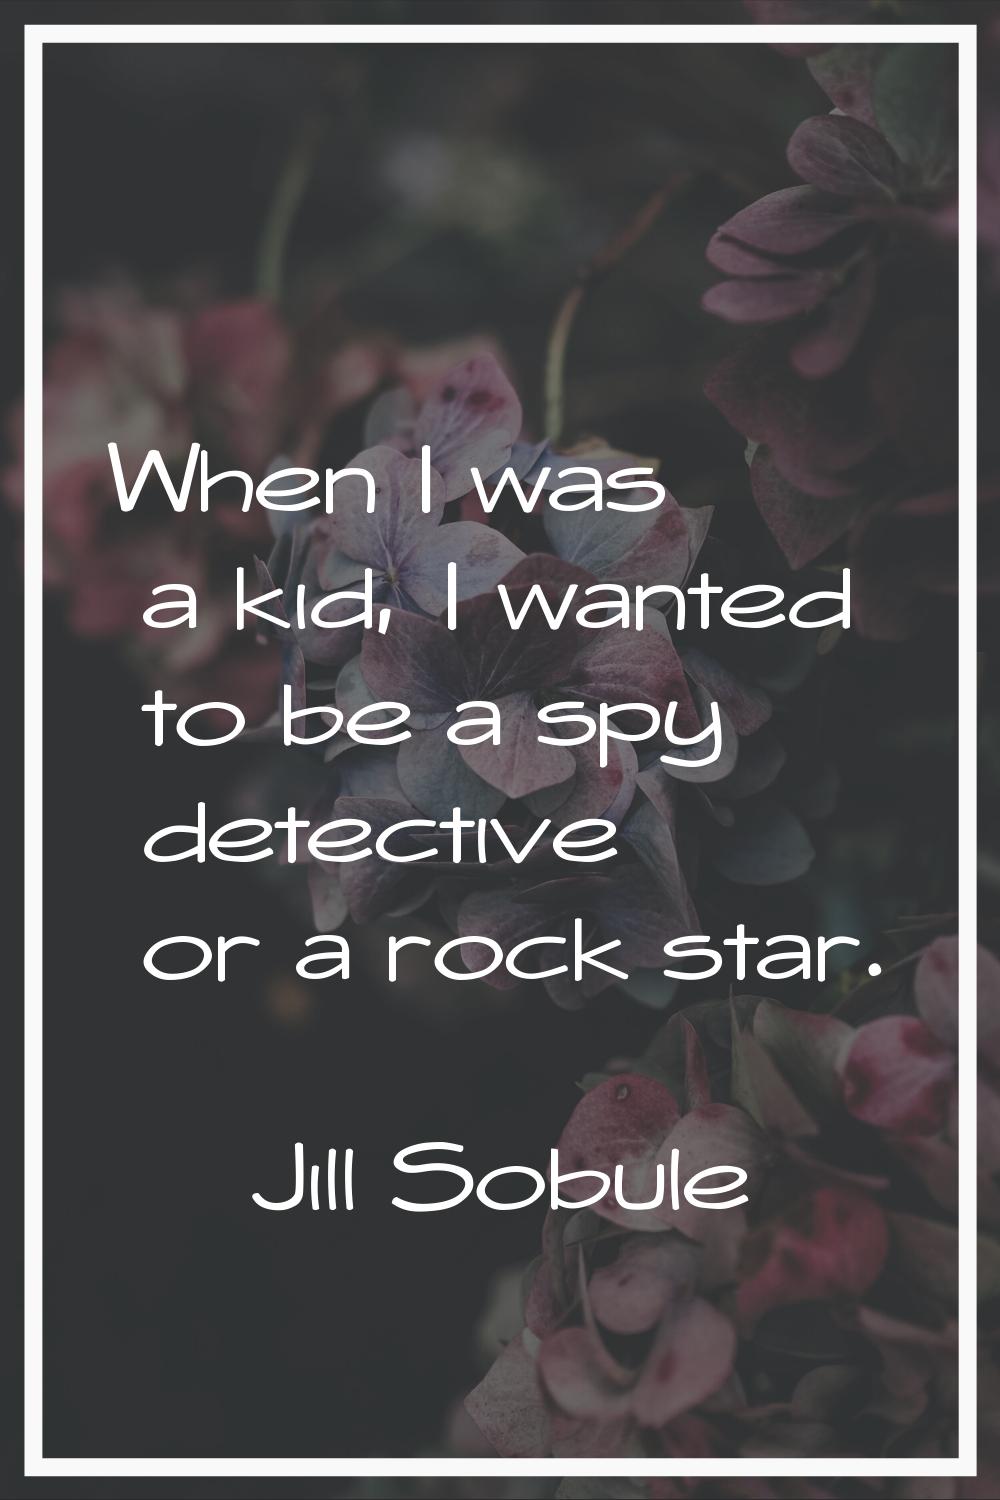 When I was a kid, I wanted to be a spy detective or a rock star.